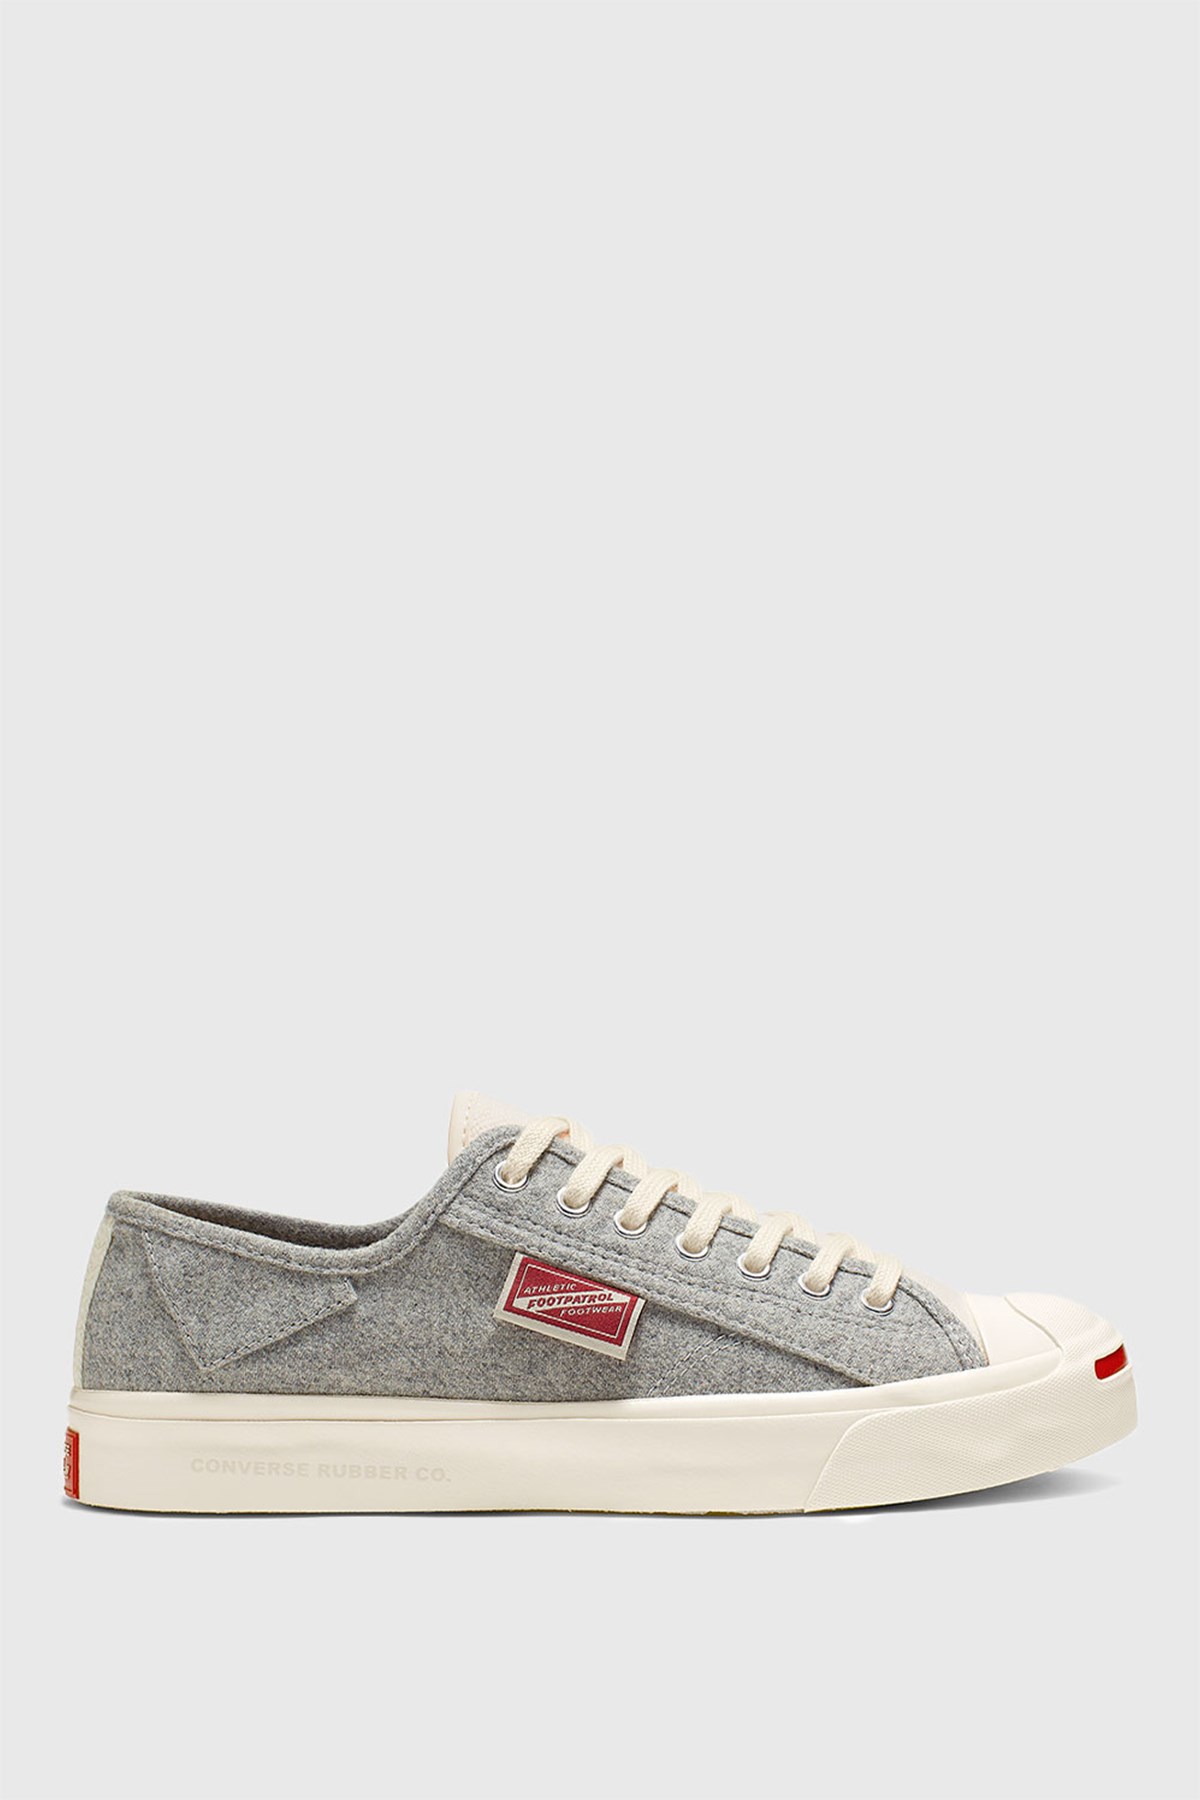 converse jack purcell ox classic